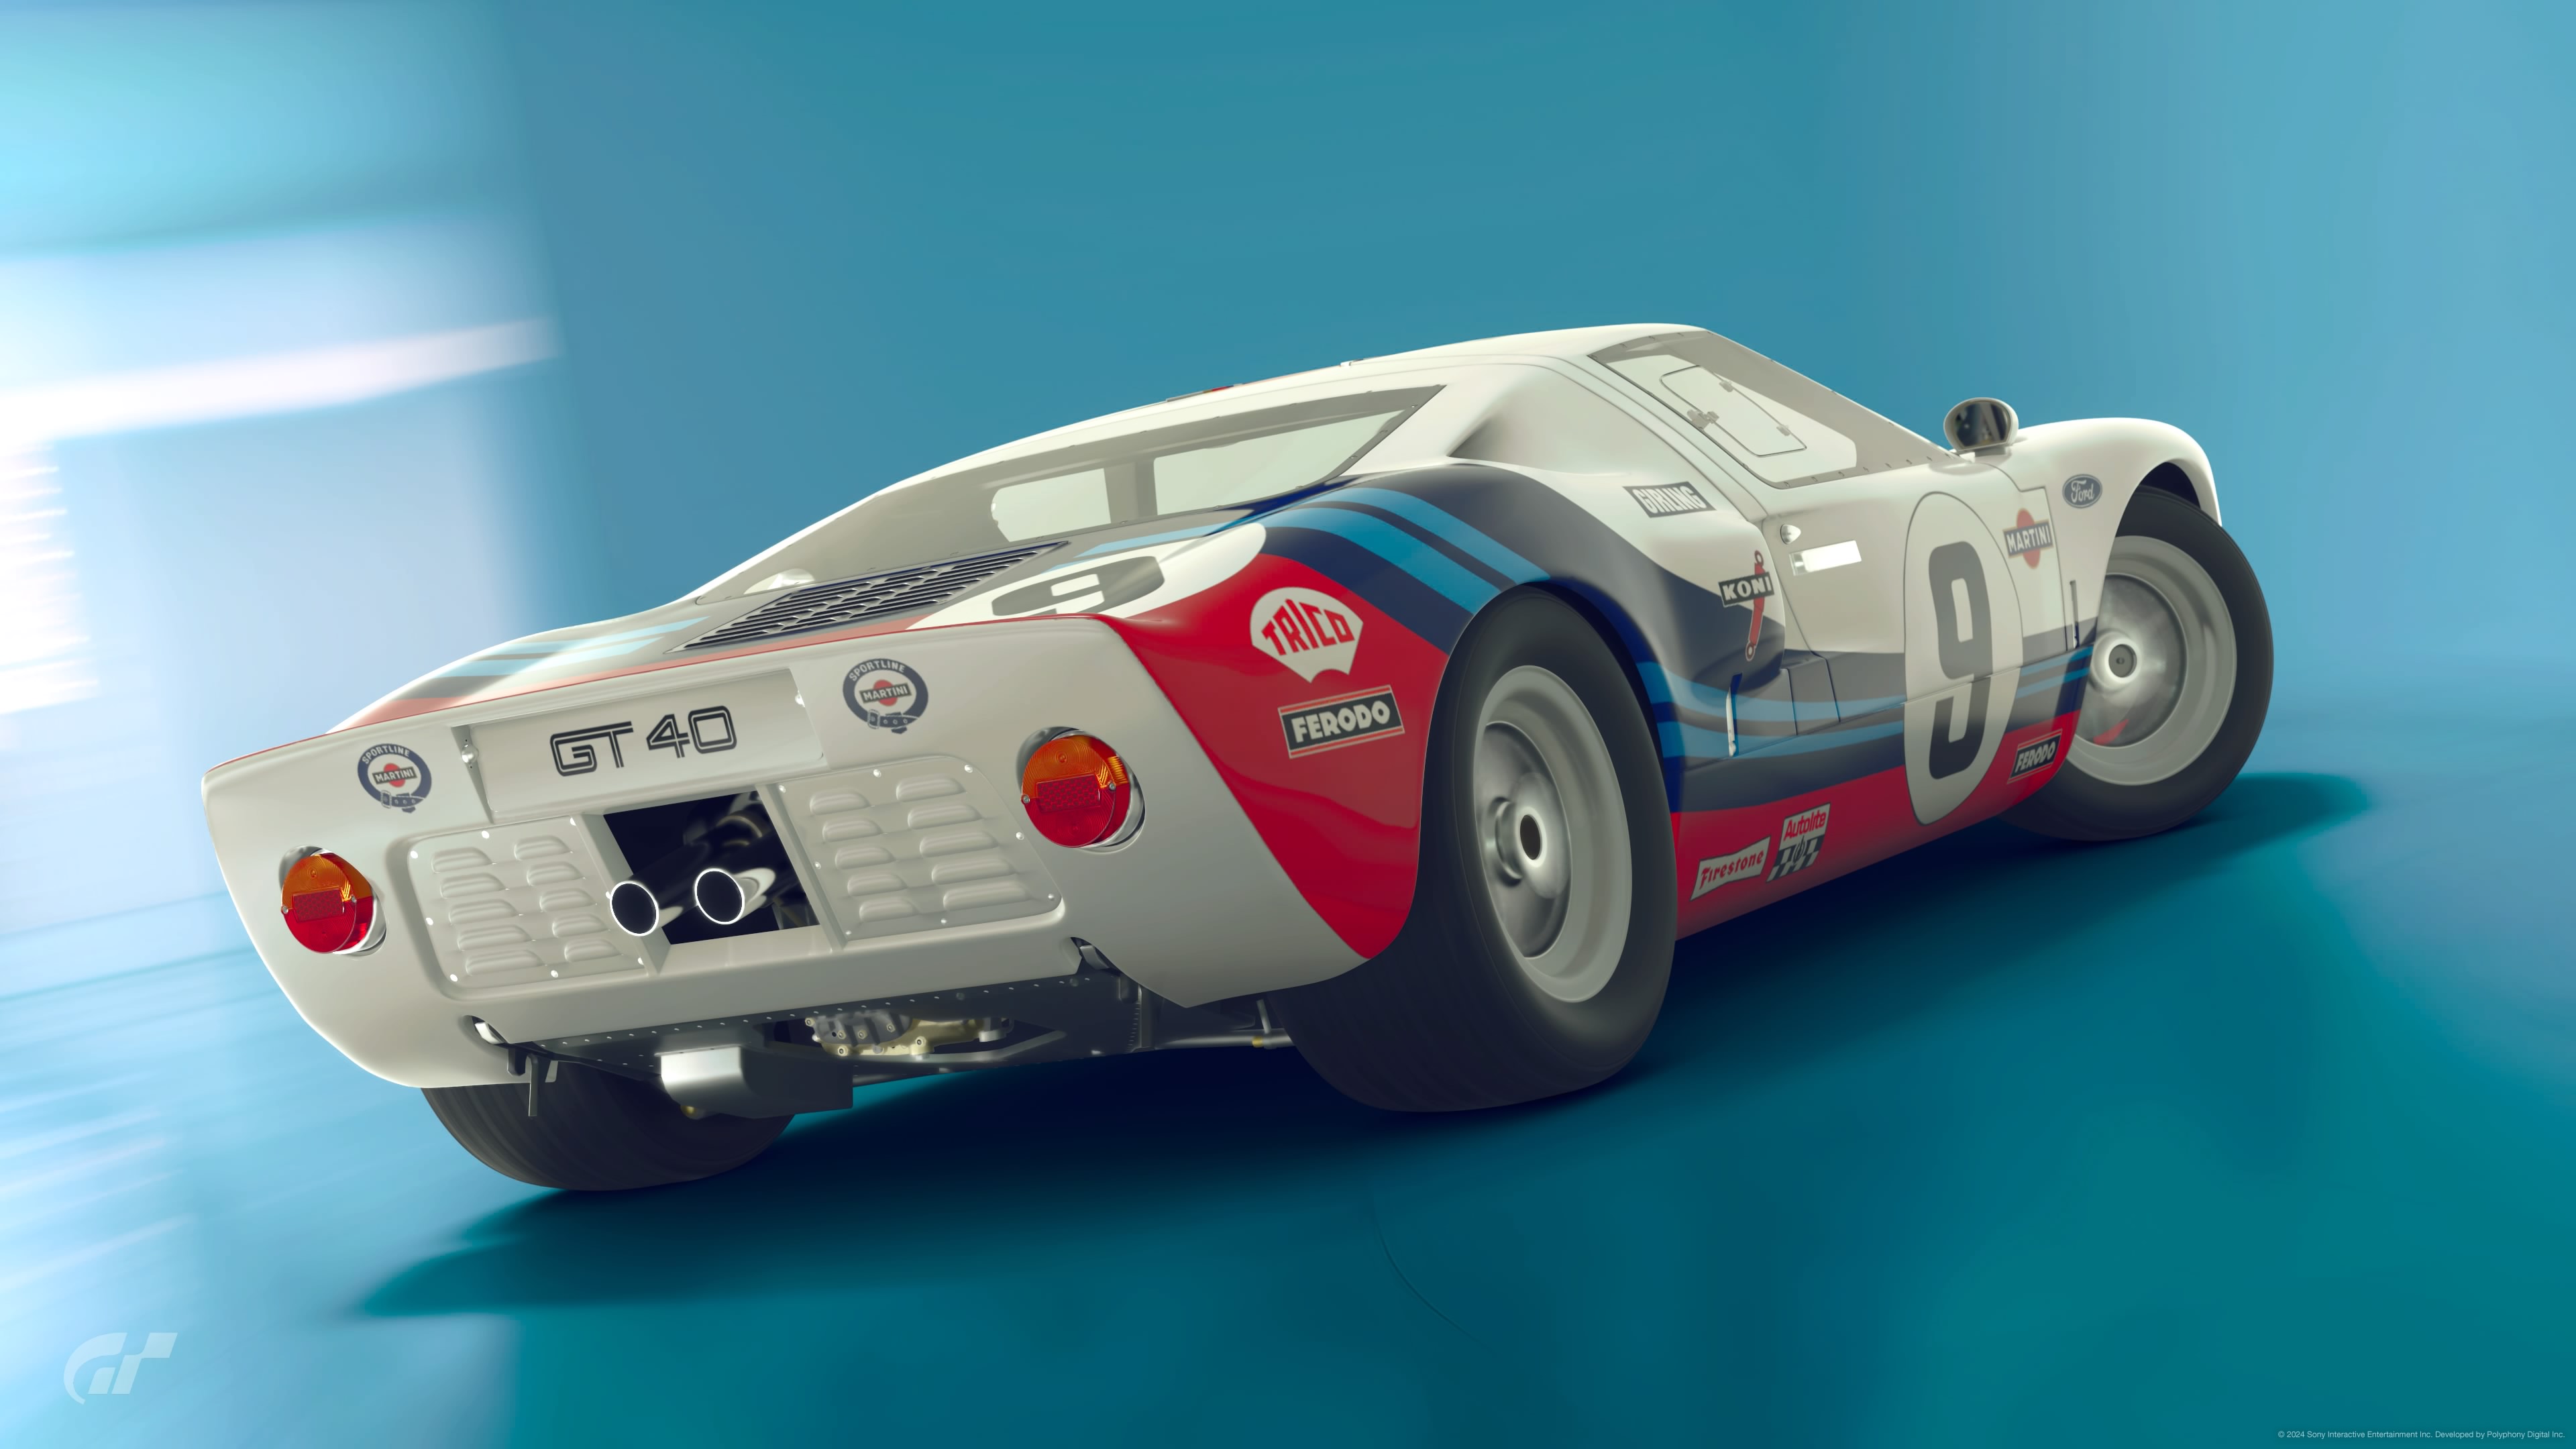 General 3840x2160 Ford GT40 American cars custom Gran Turismo 7 livery Martini Le Mans video games rear view 1966 (Year) watermarked car vehicle Ford motorsport racing race cars reflection V8 engine Polyphony Digital